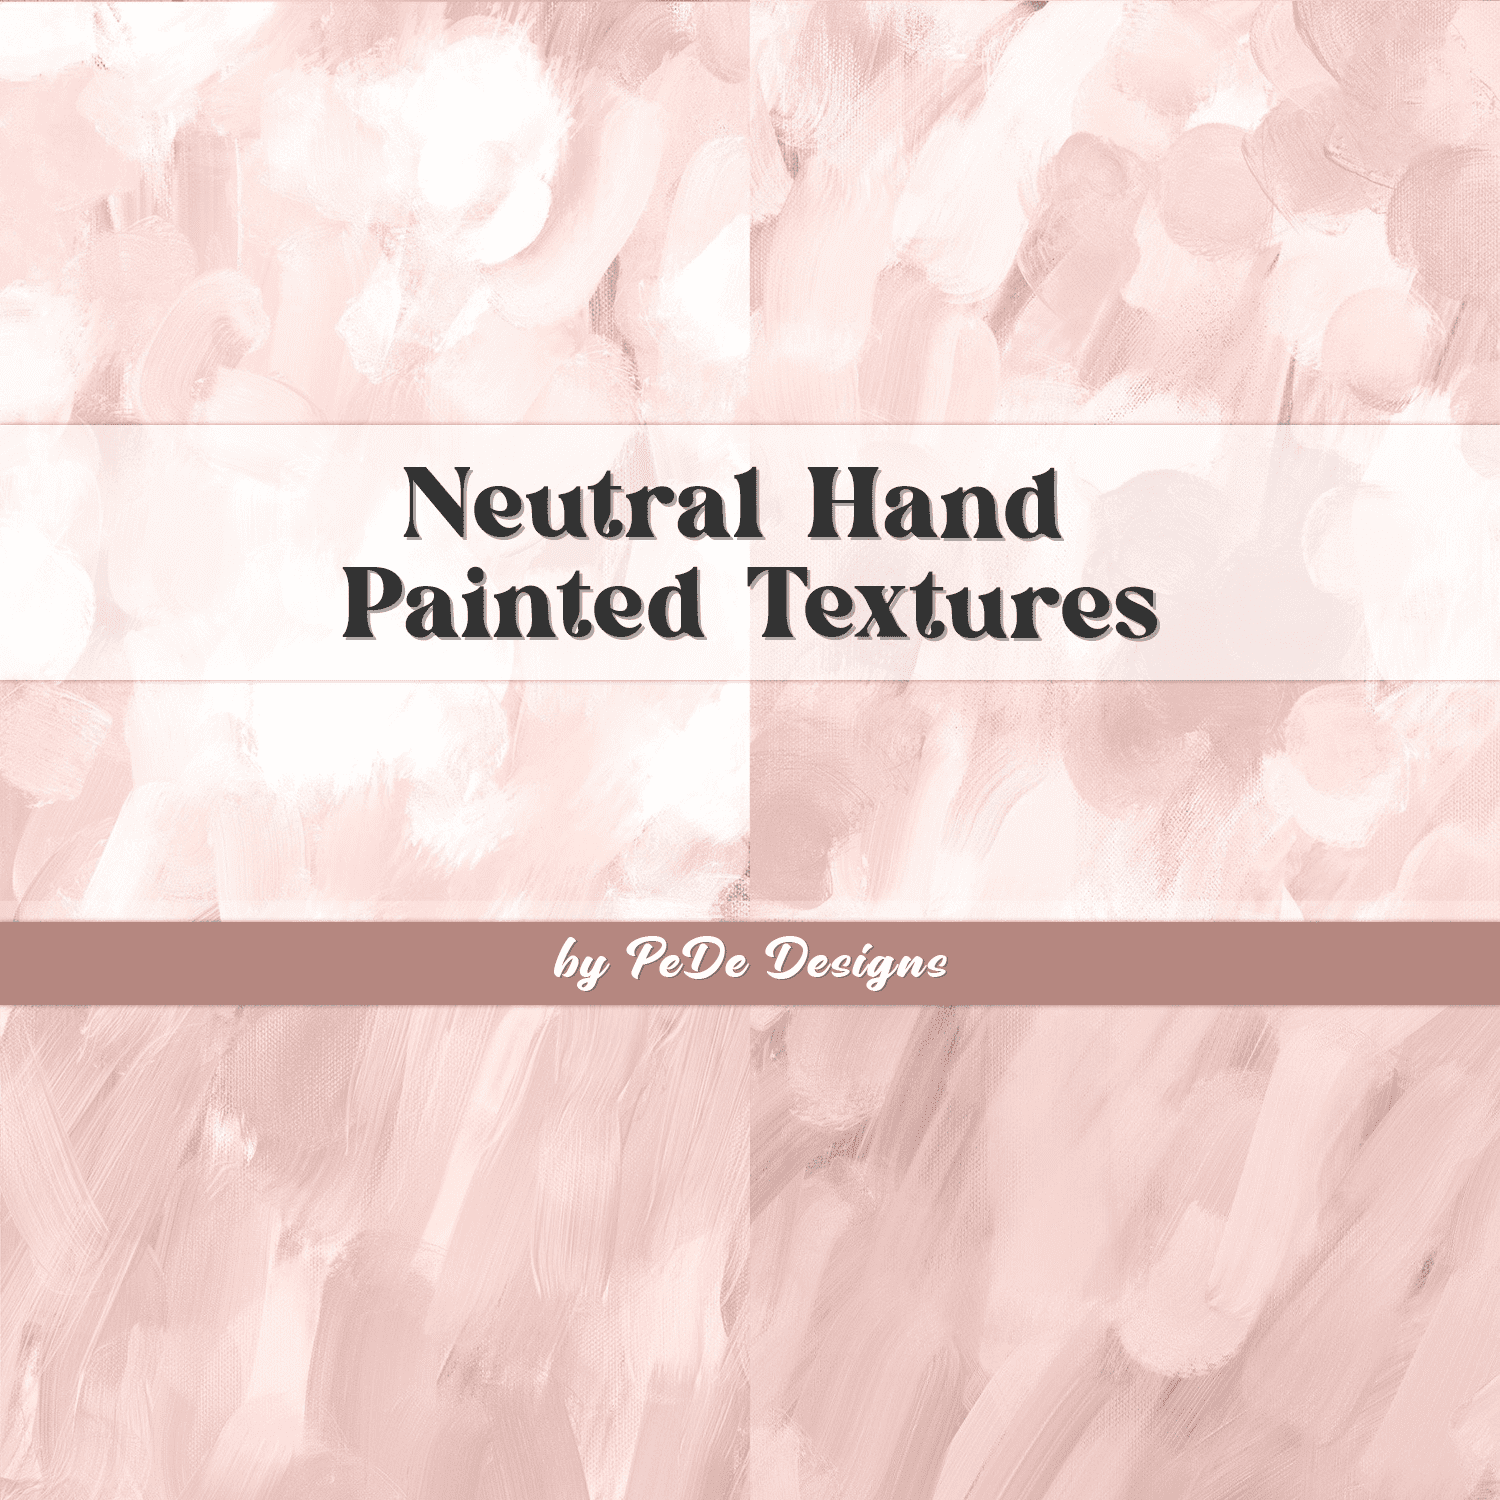 Neutral Hand Painted Textures cover.